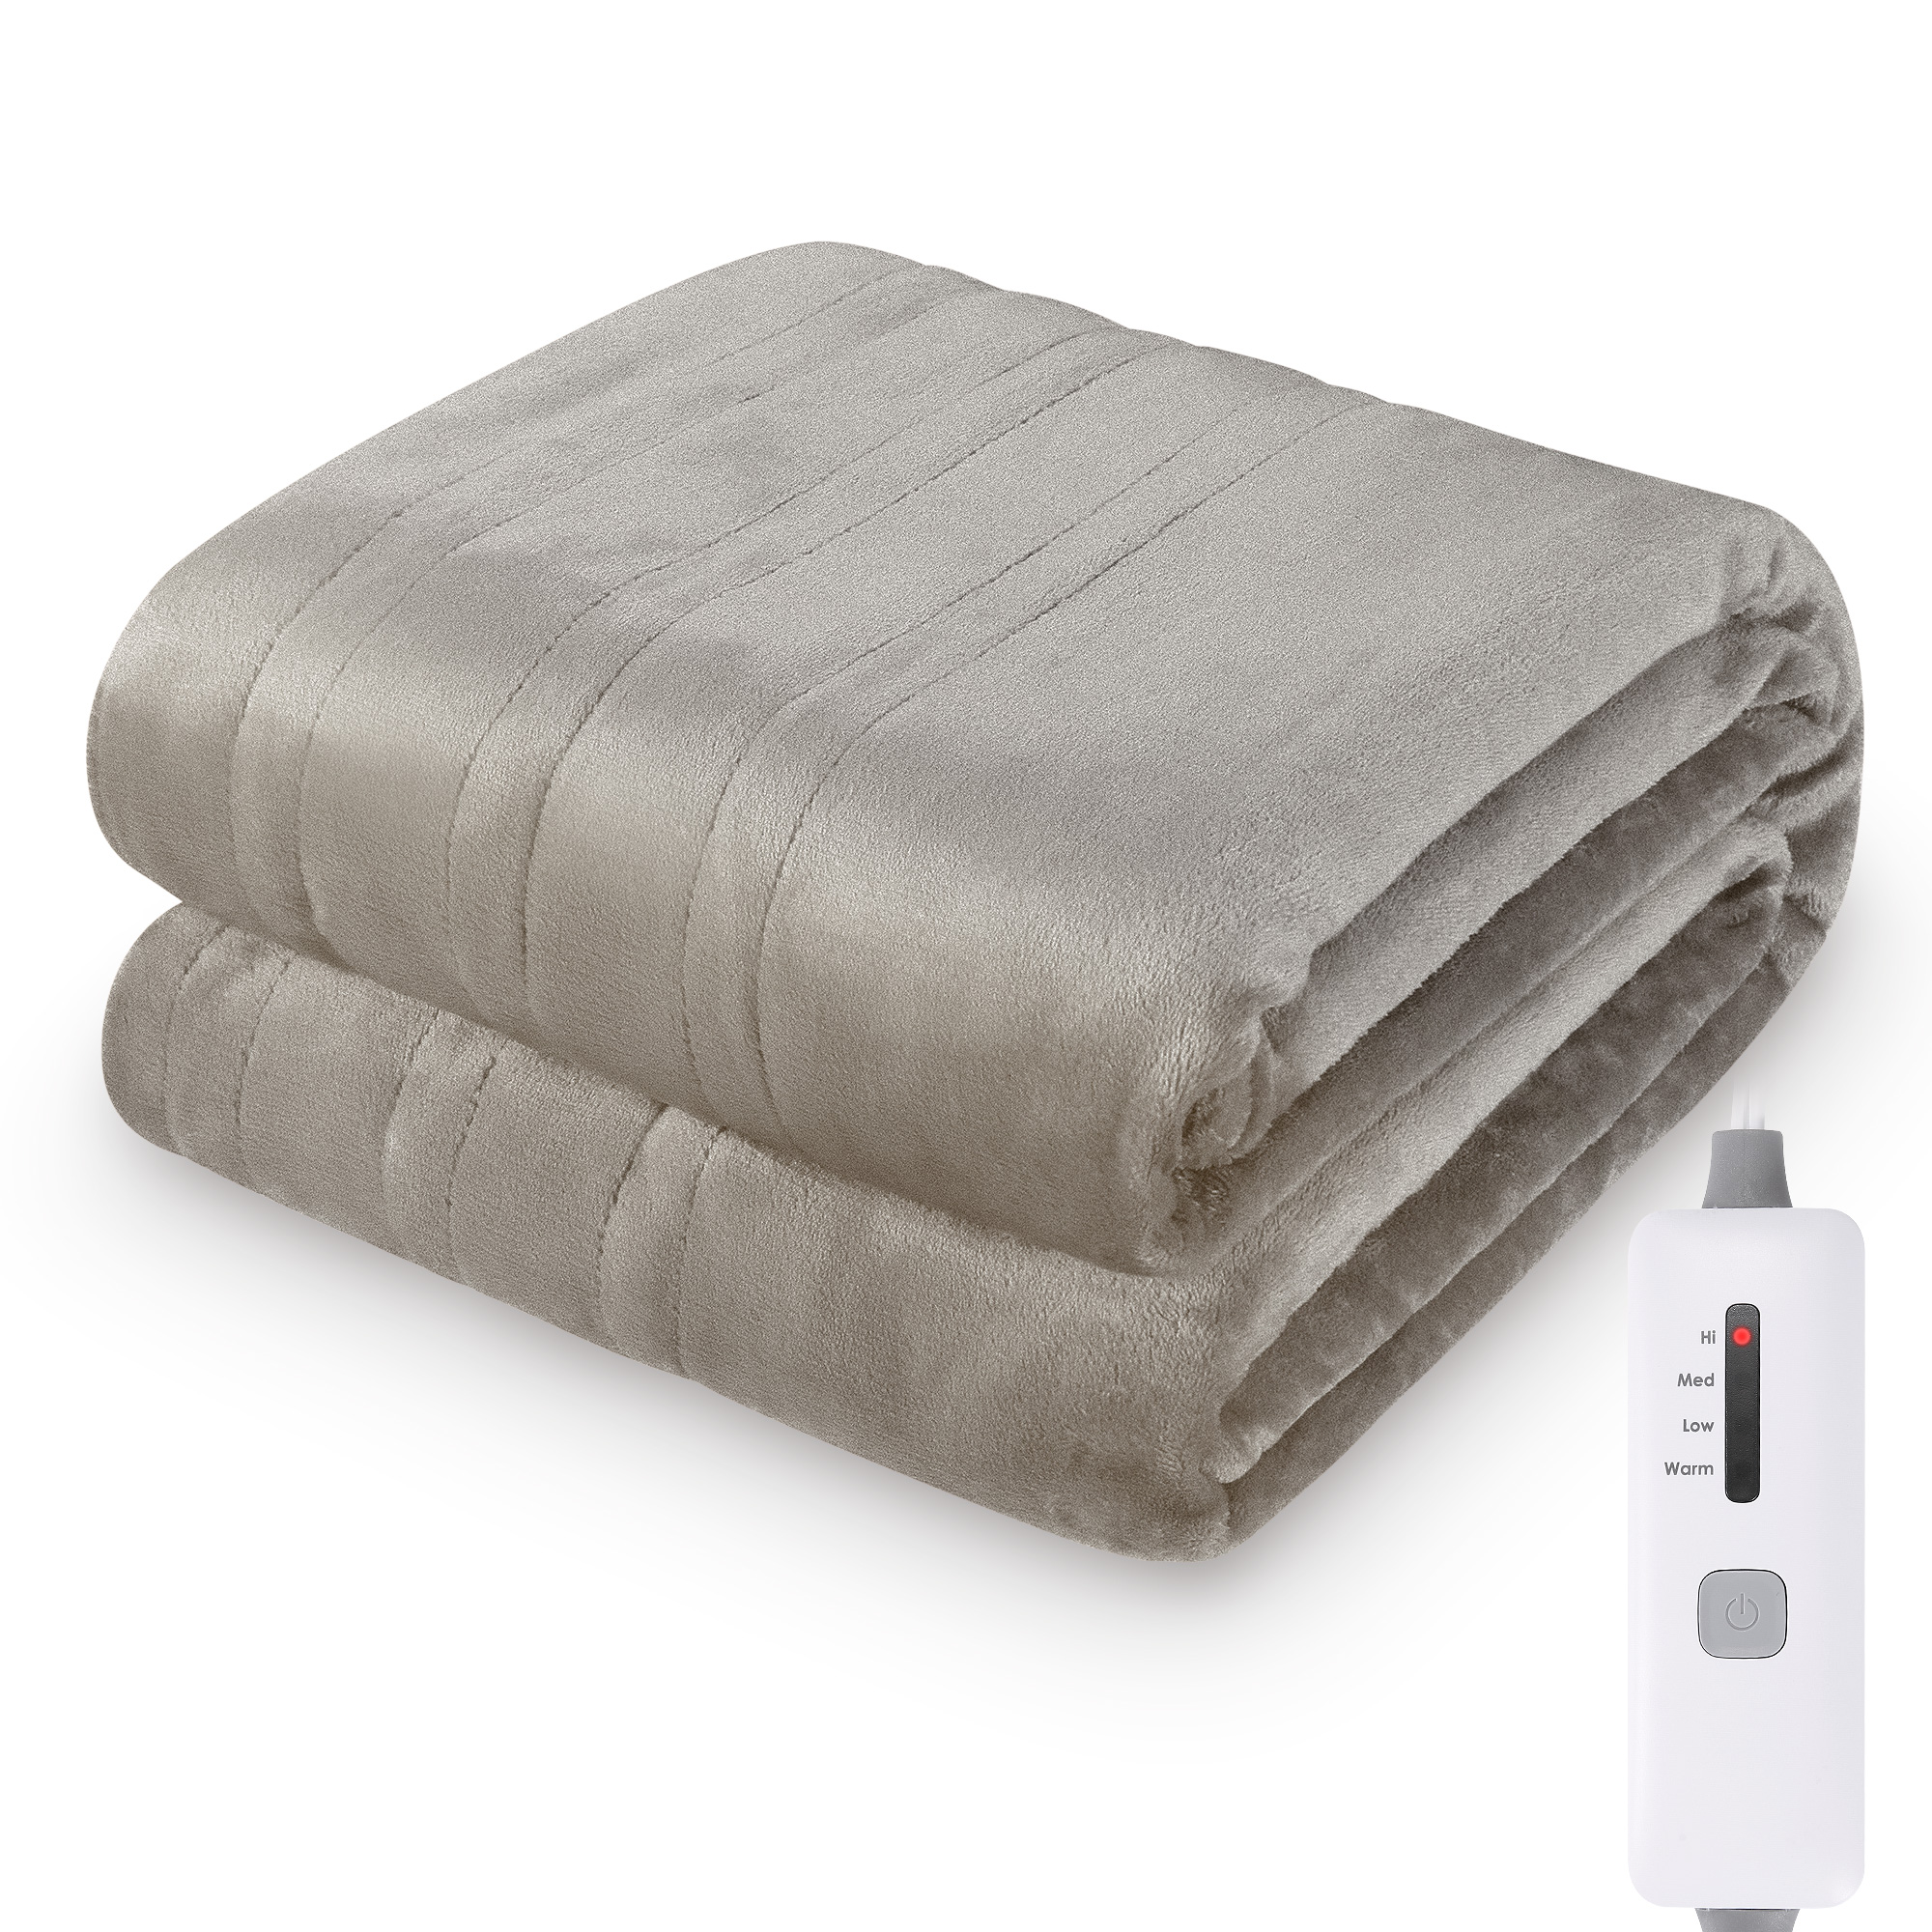 MARNUR Electric Blanket 72" x 84" Full Size Heated Blanket, Fast Heating, 4 Heating Levels, 10H Auto-off, Machine Washable - Linen - image 3 of 13